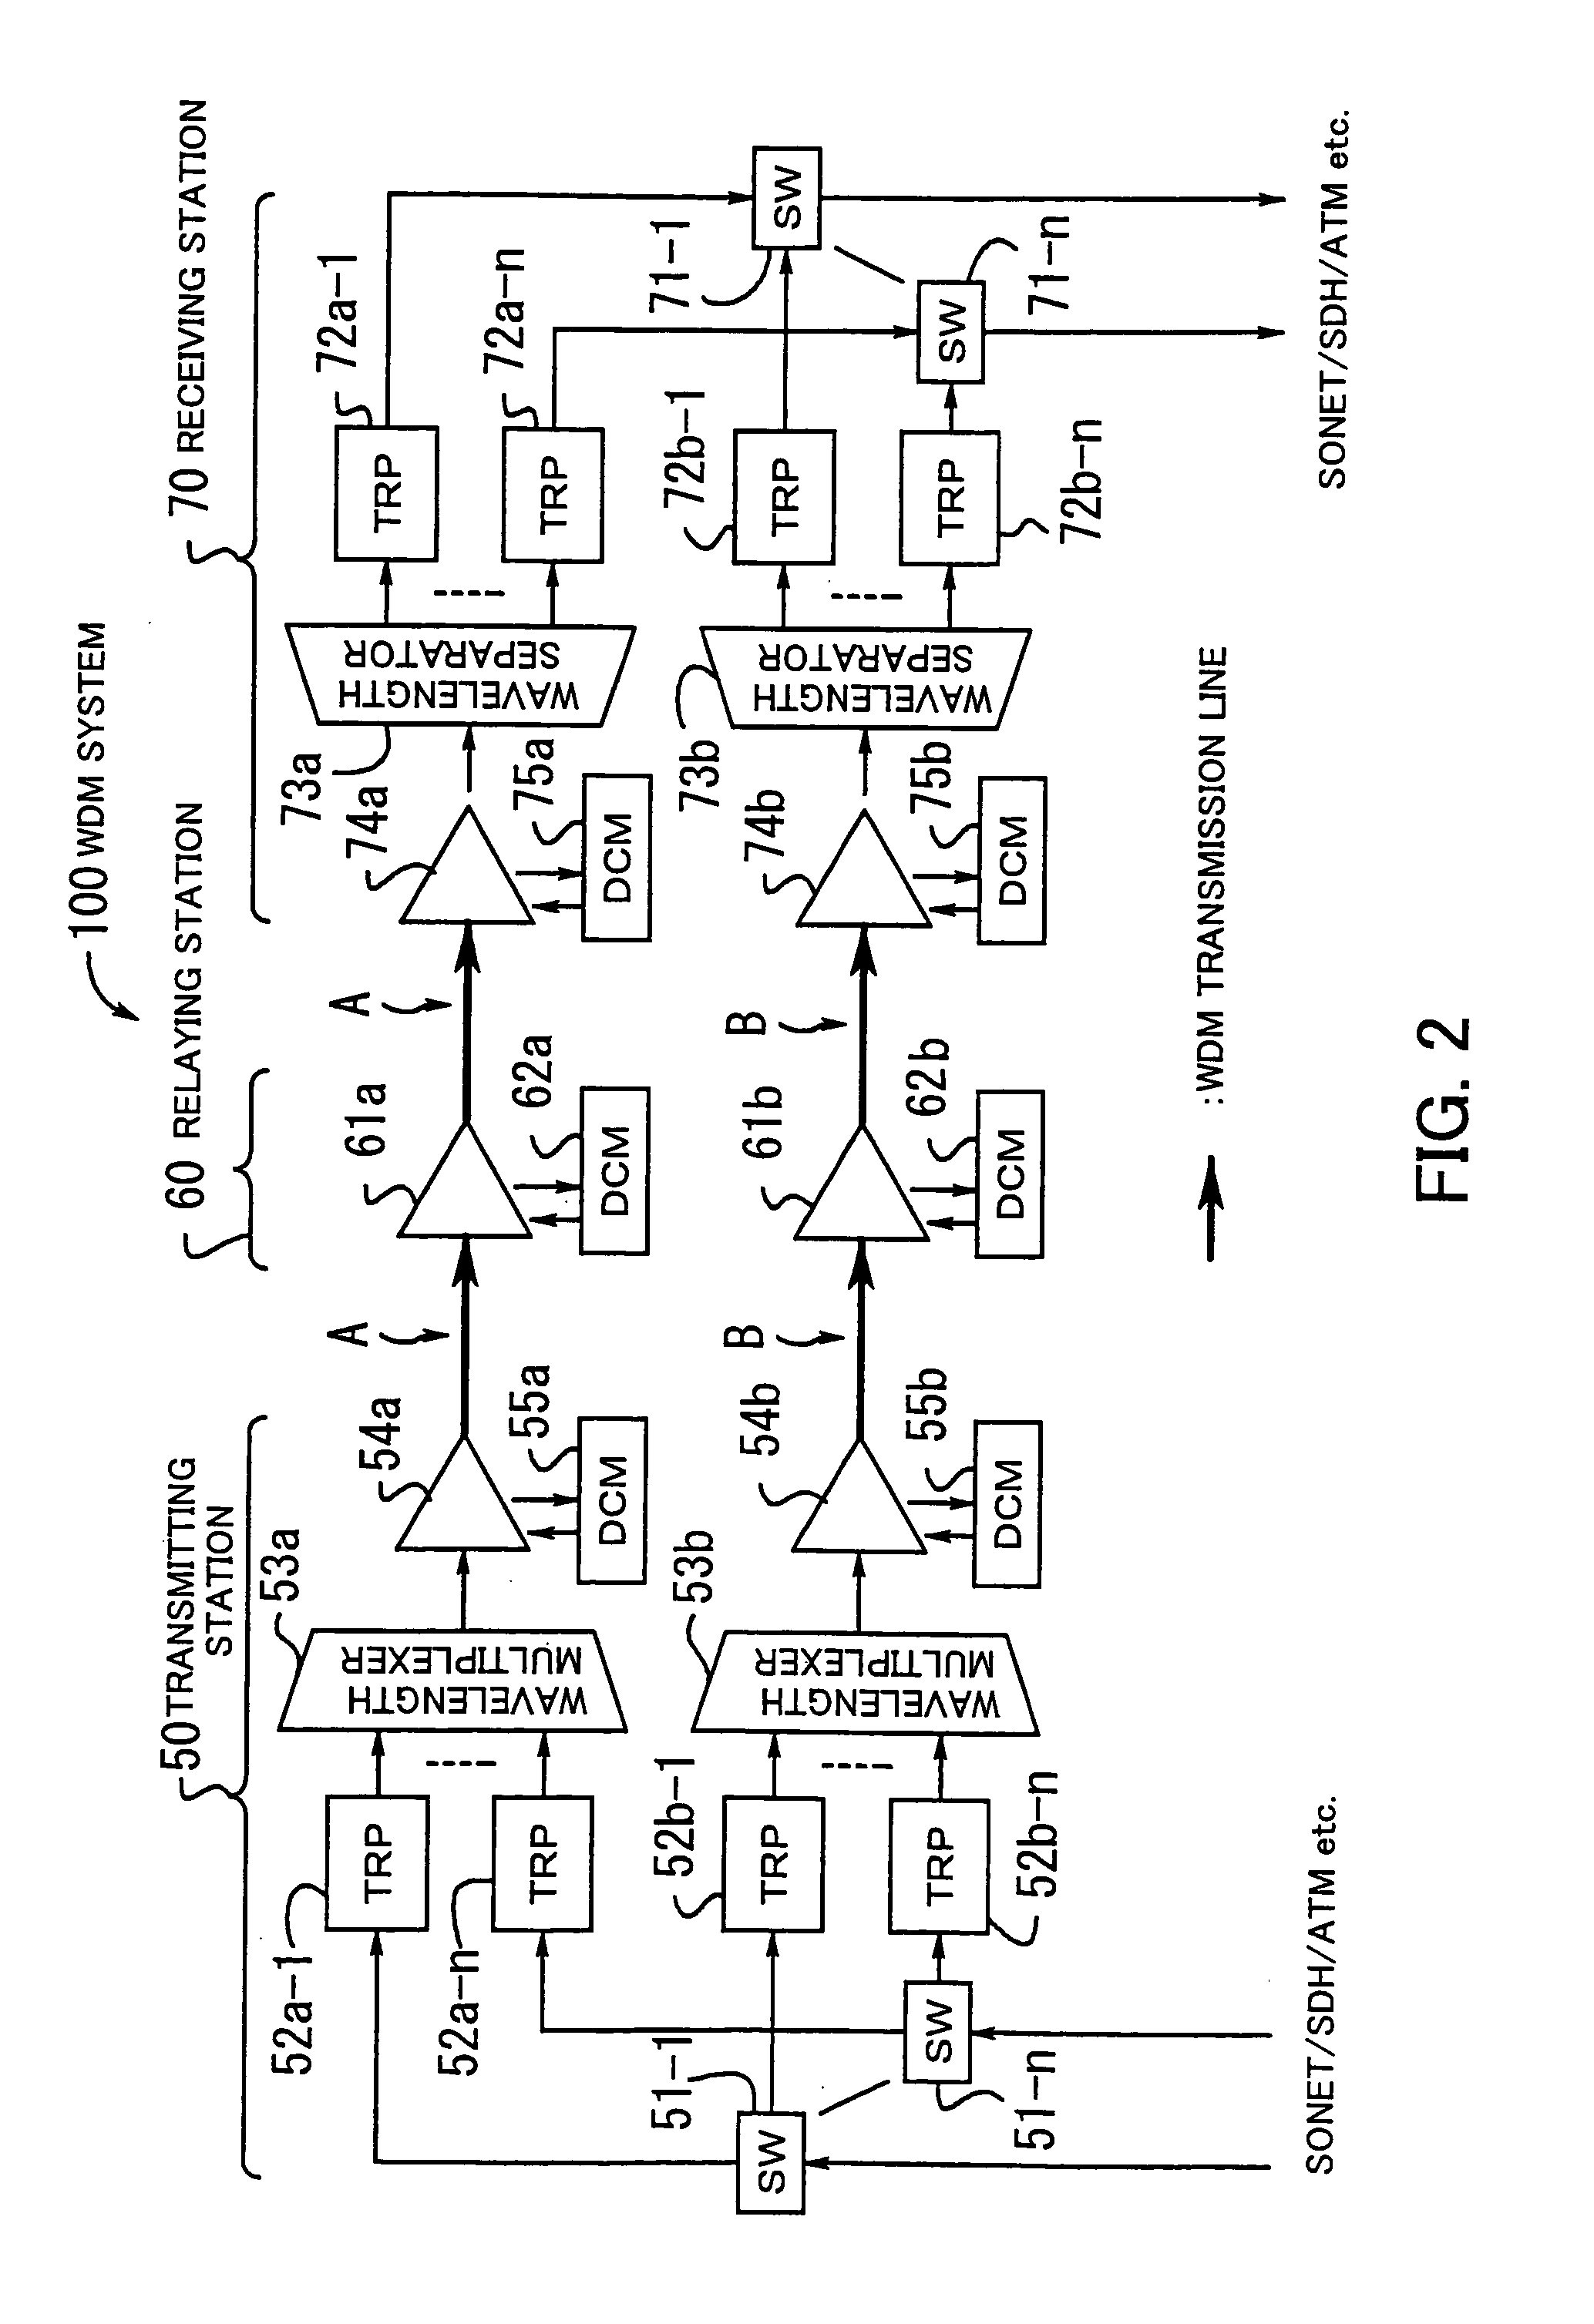 Redundant WDM transmission system optical receiver with reduced variable optical attenuators and/or variable dispersion compensation modules